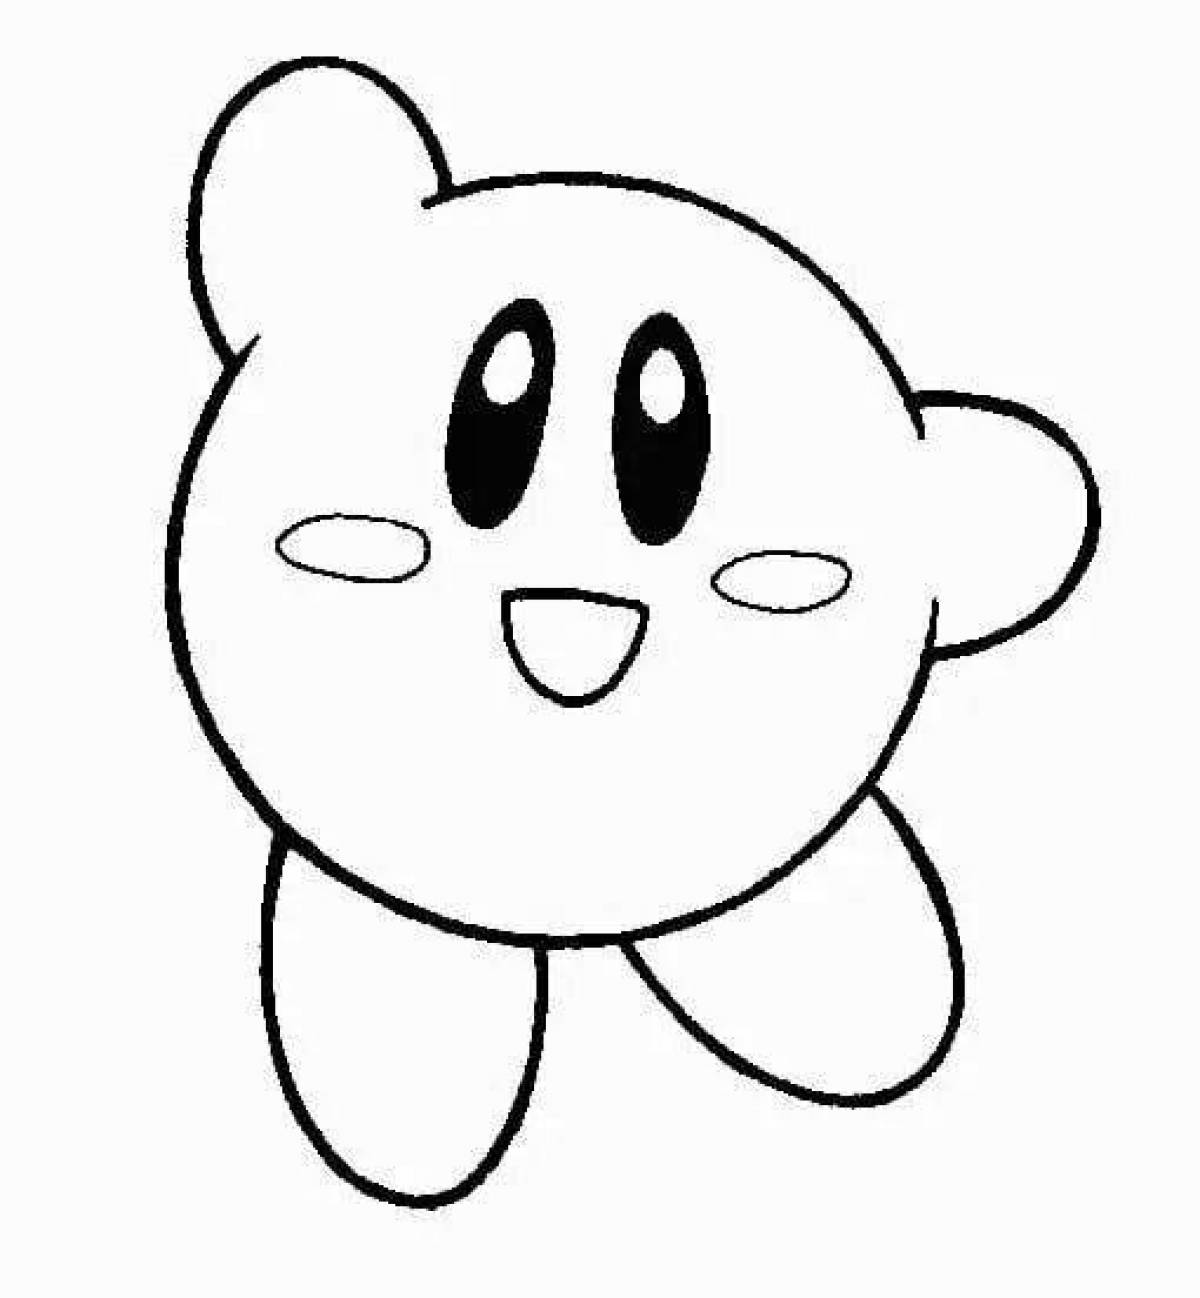 Courageous kirby coloring page